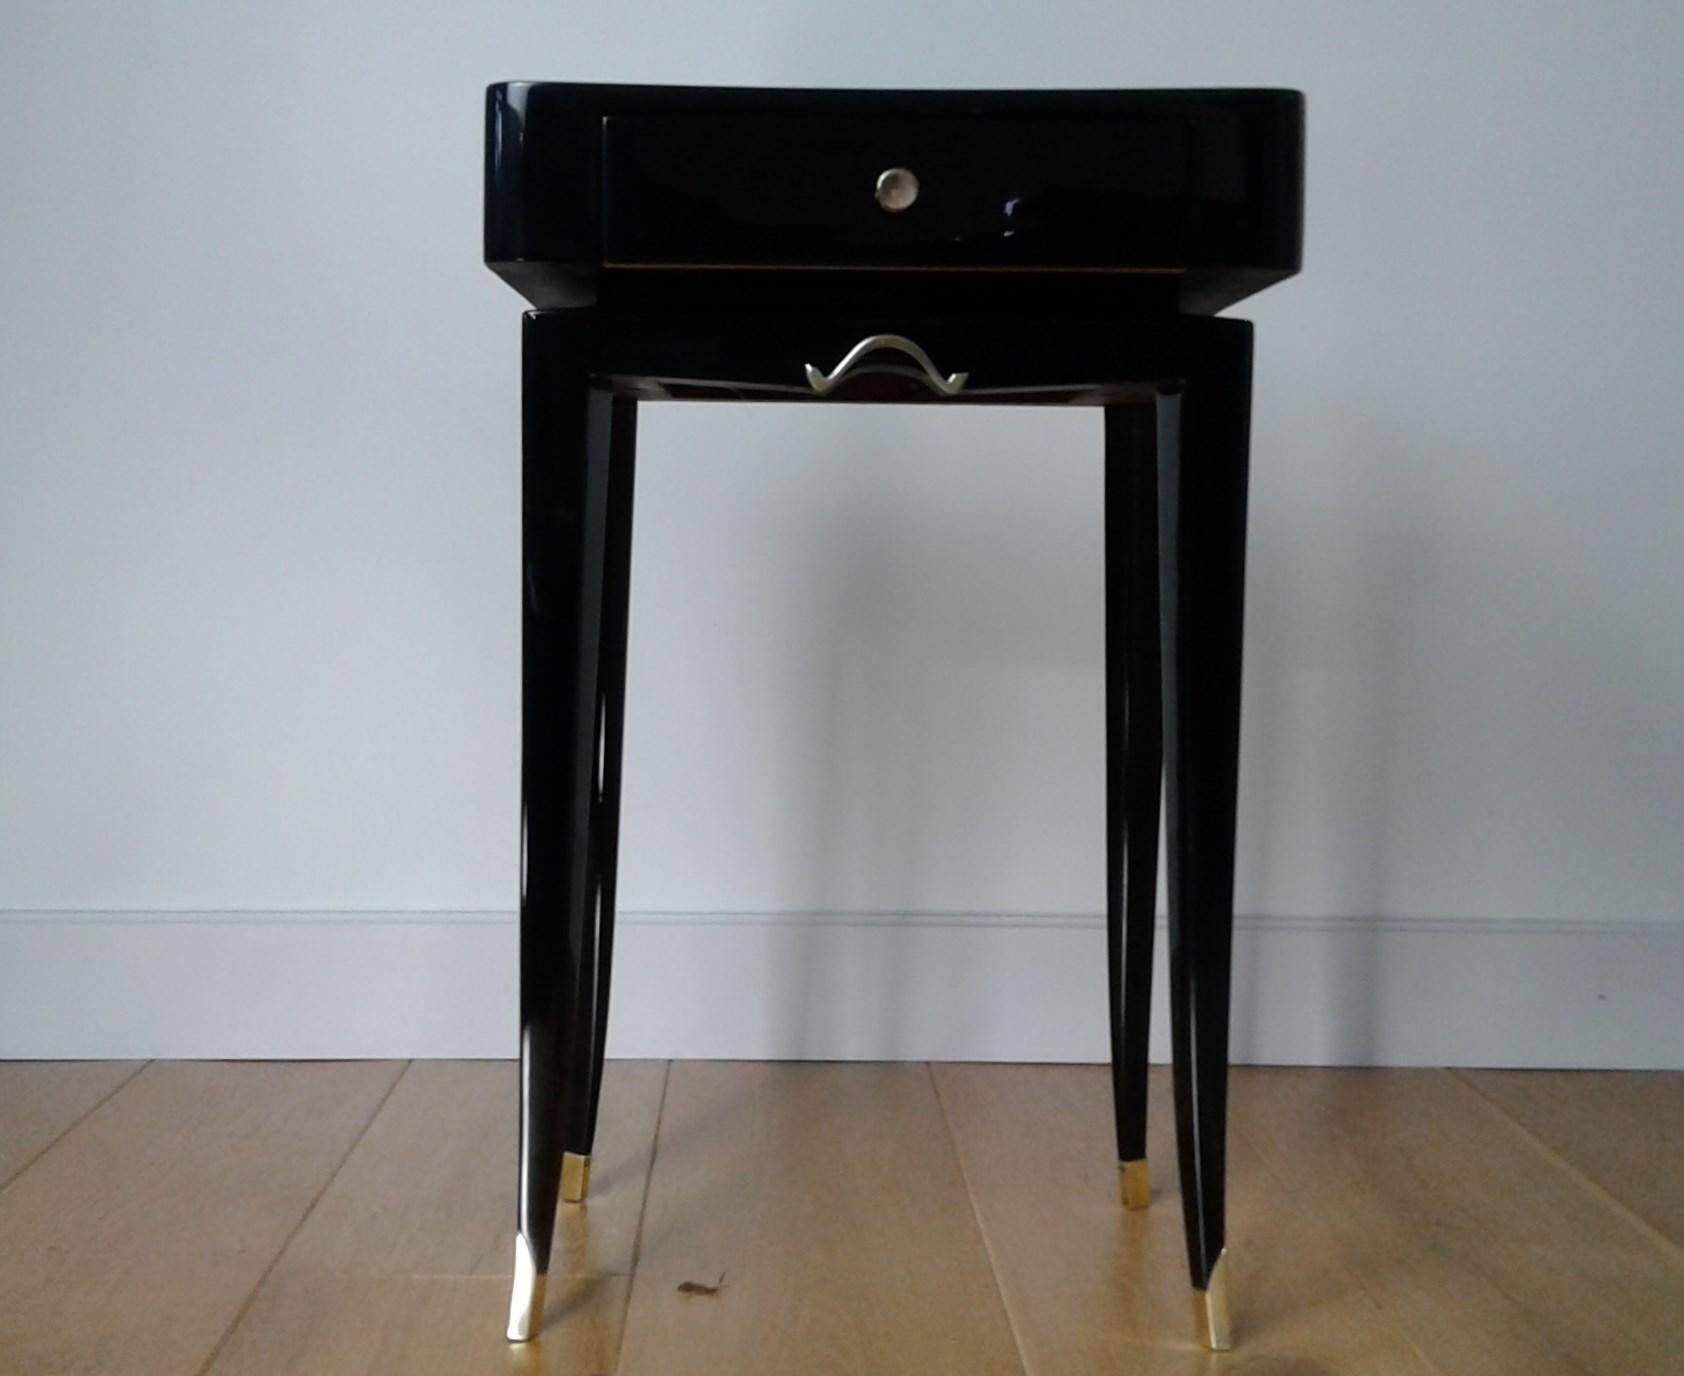 Pair of black lacquered bedside tables or end tables made of a black lacquered rectangular pedestal resting on four saber feet ending with brass shoes.
A drawer is set on the front. It opens with a brass handle and serves as storage.
Fully